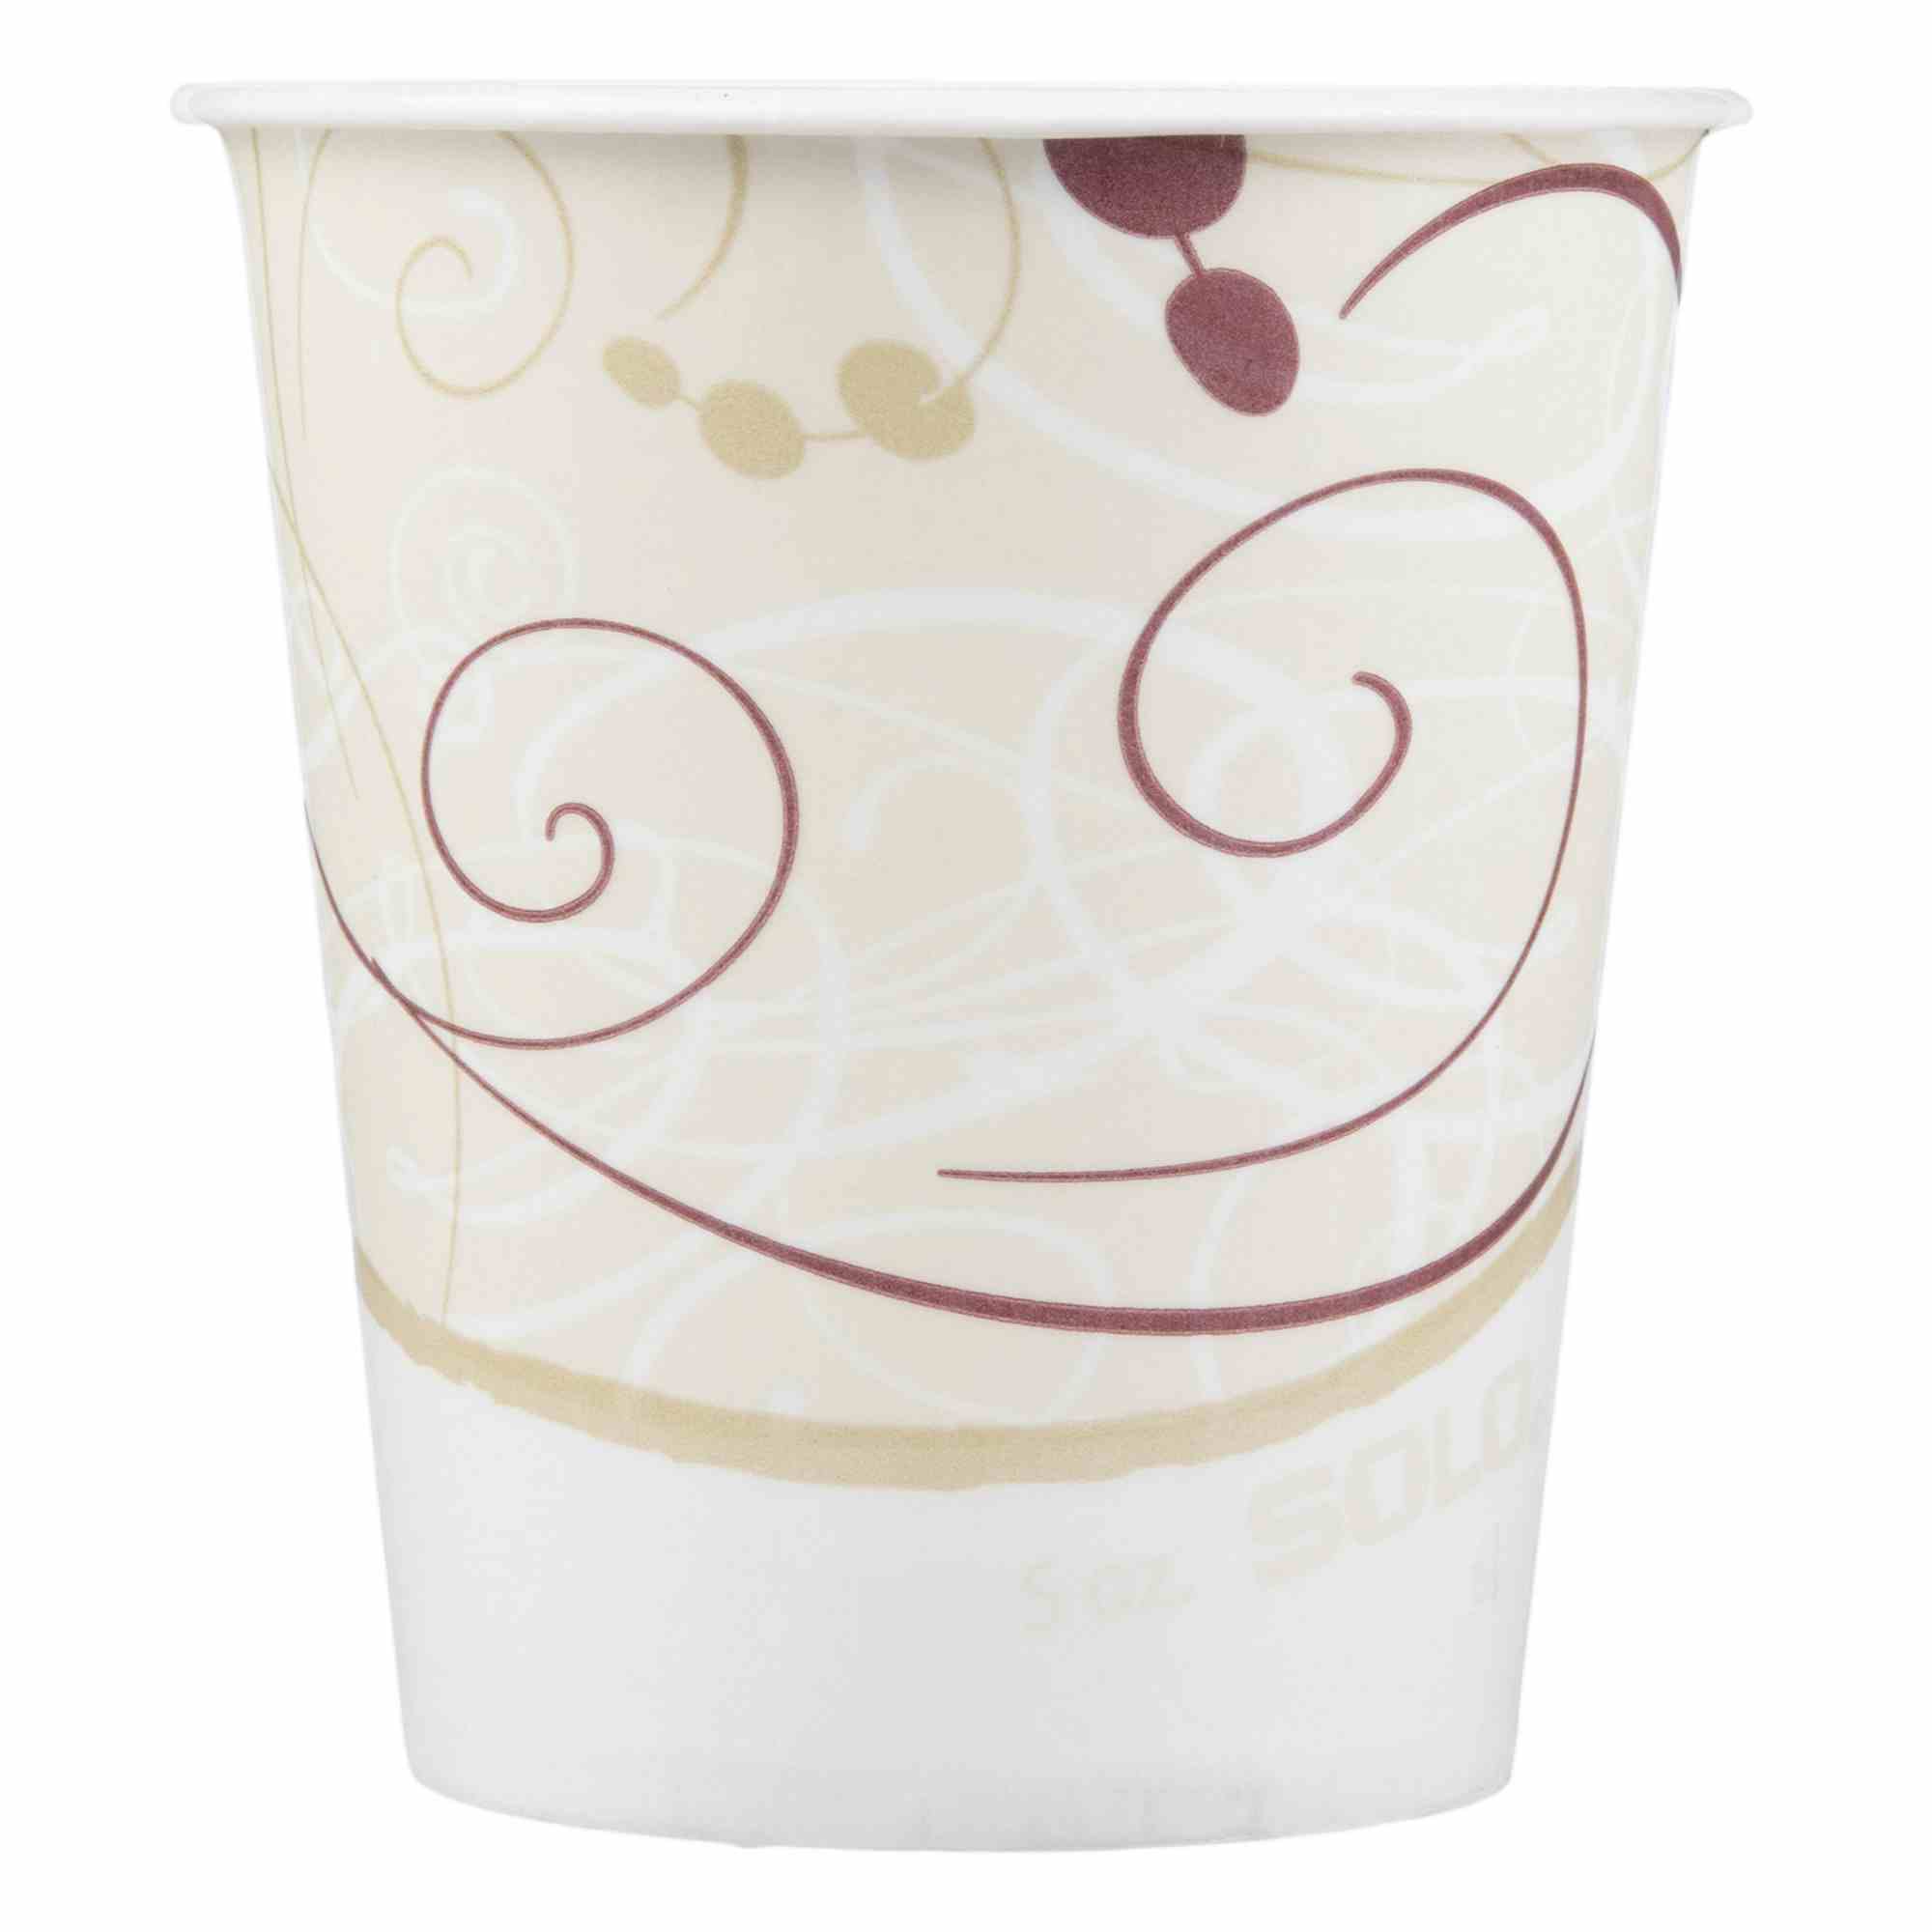 Solo Disposable Paper Drinking Cup, Symphony Print, R53-J8000, 5 oz - Sleeve of 100